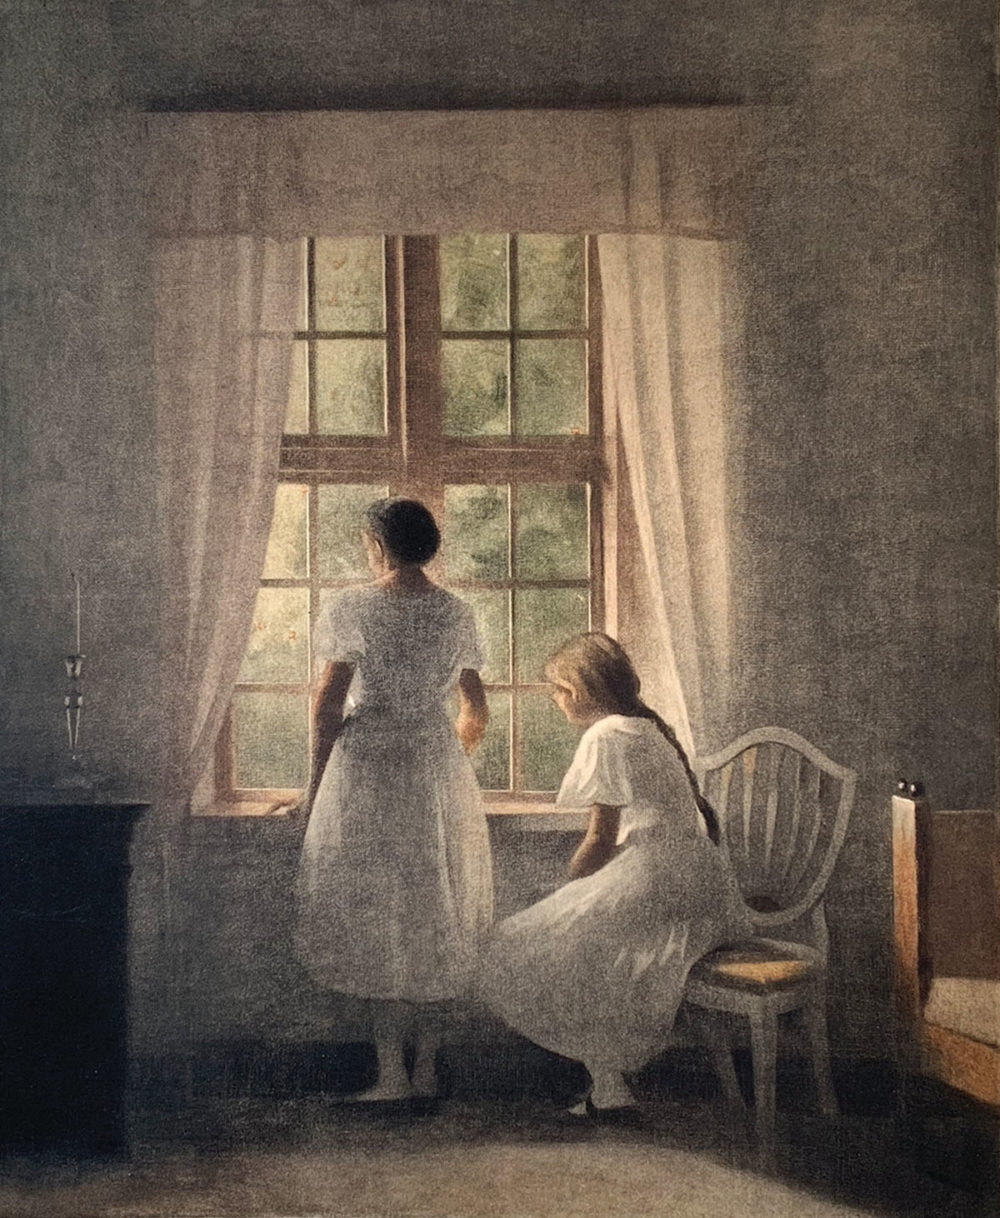 Collection Image: Ilsted "Two Young Girls at Window"